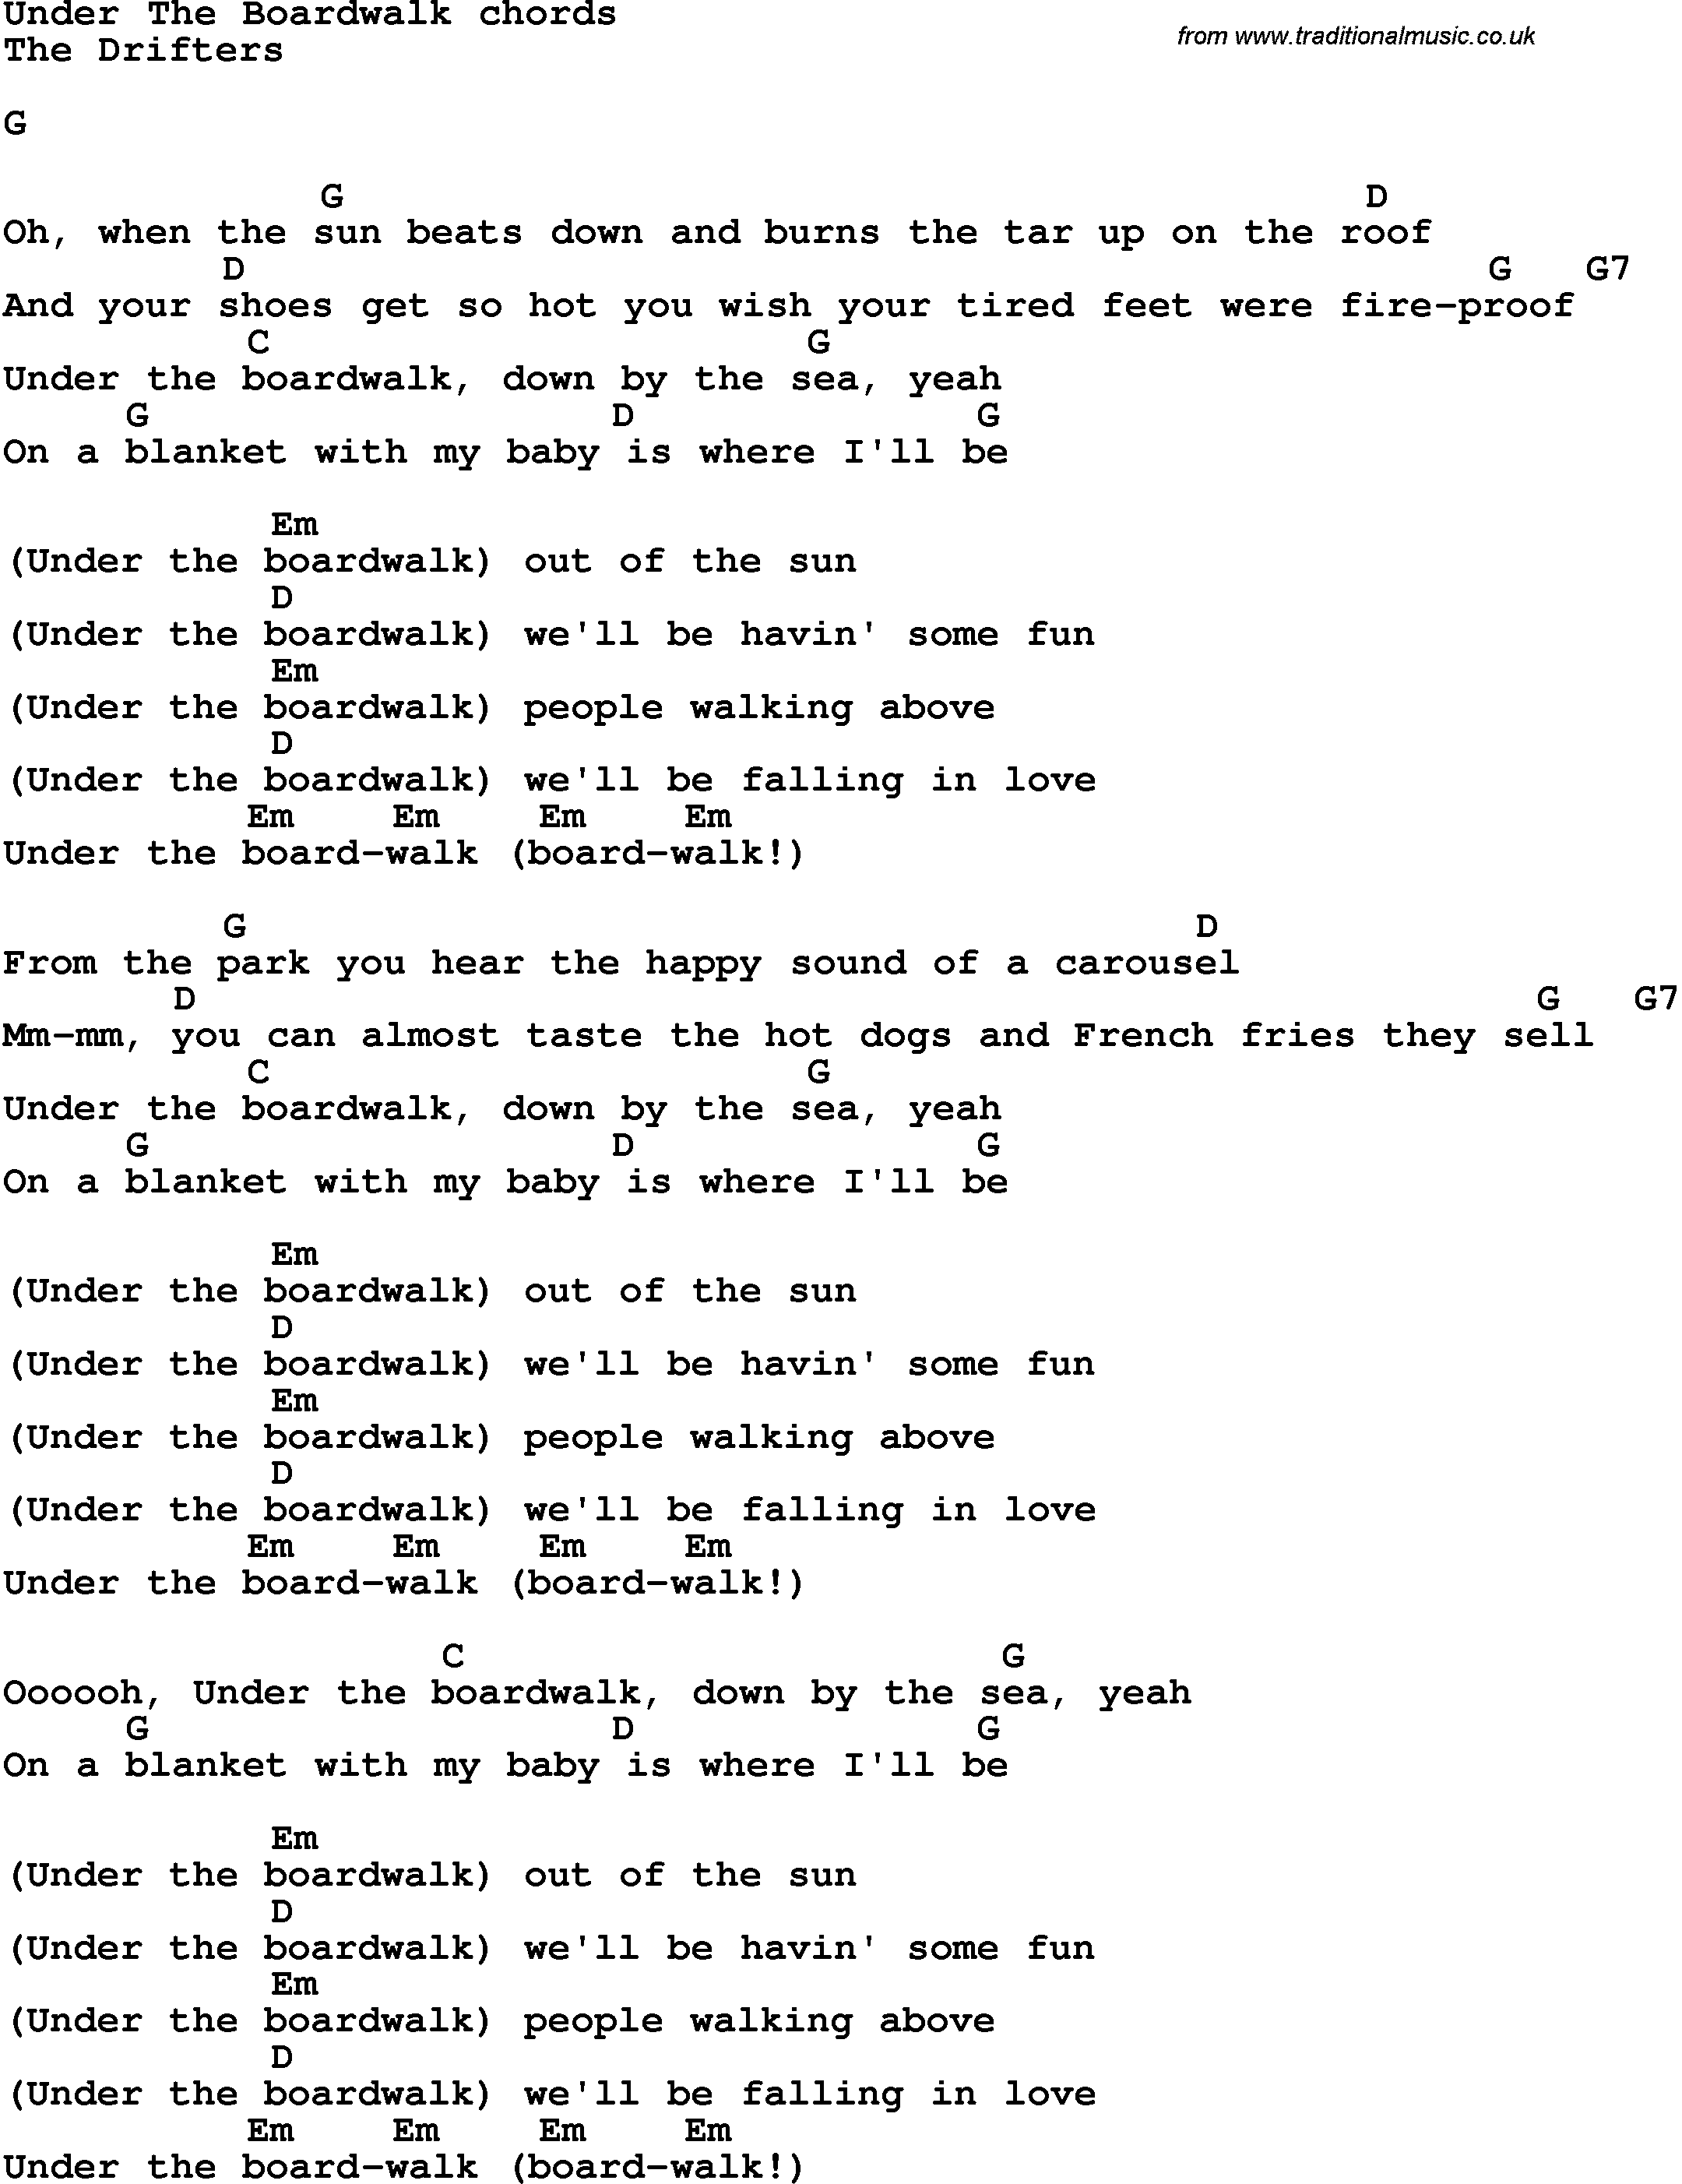 Song Lyrics With Guitar Chords For Under The Boardwalk The Drifters